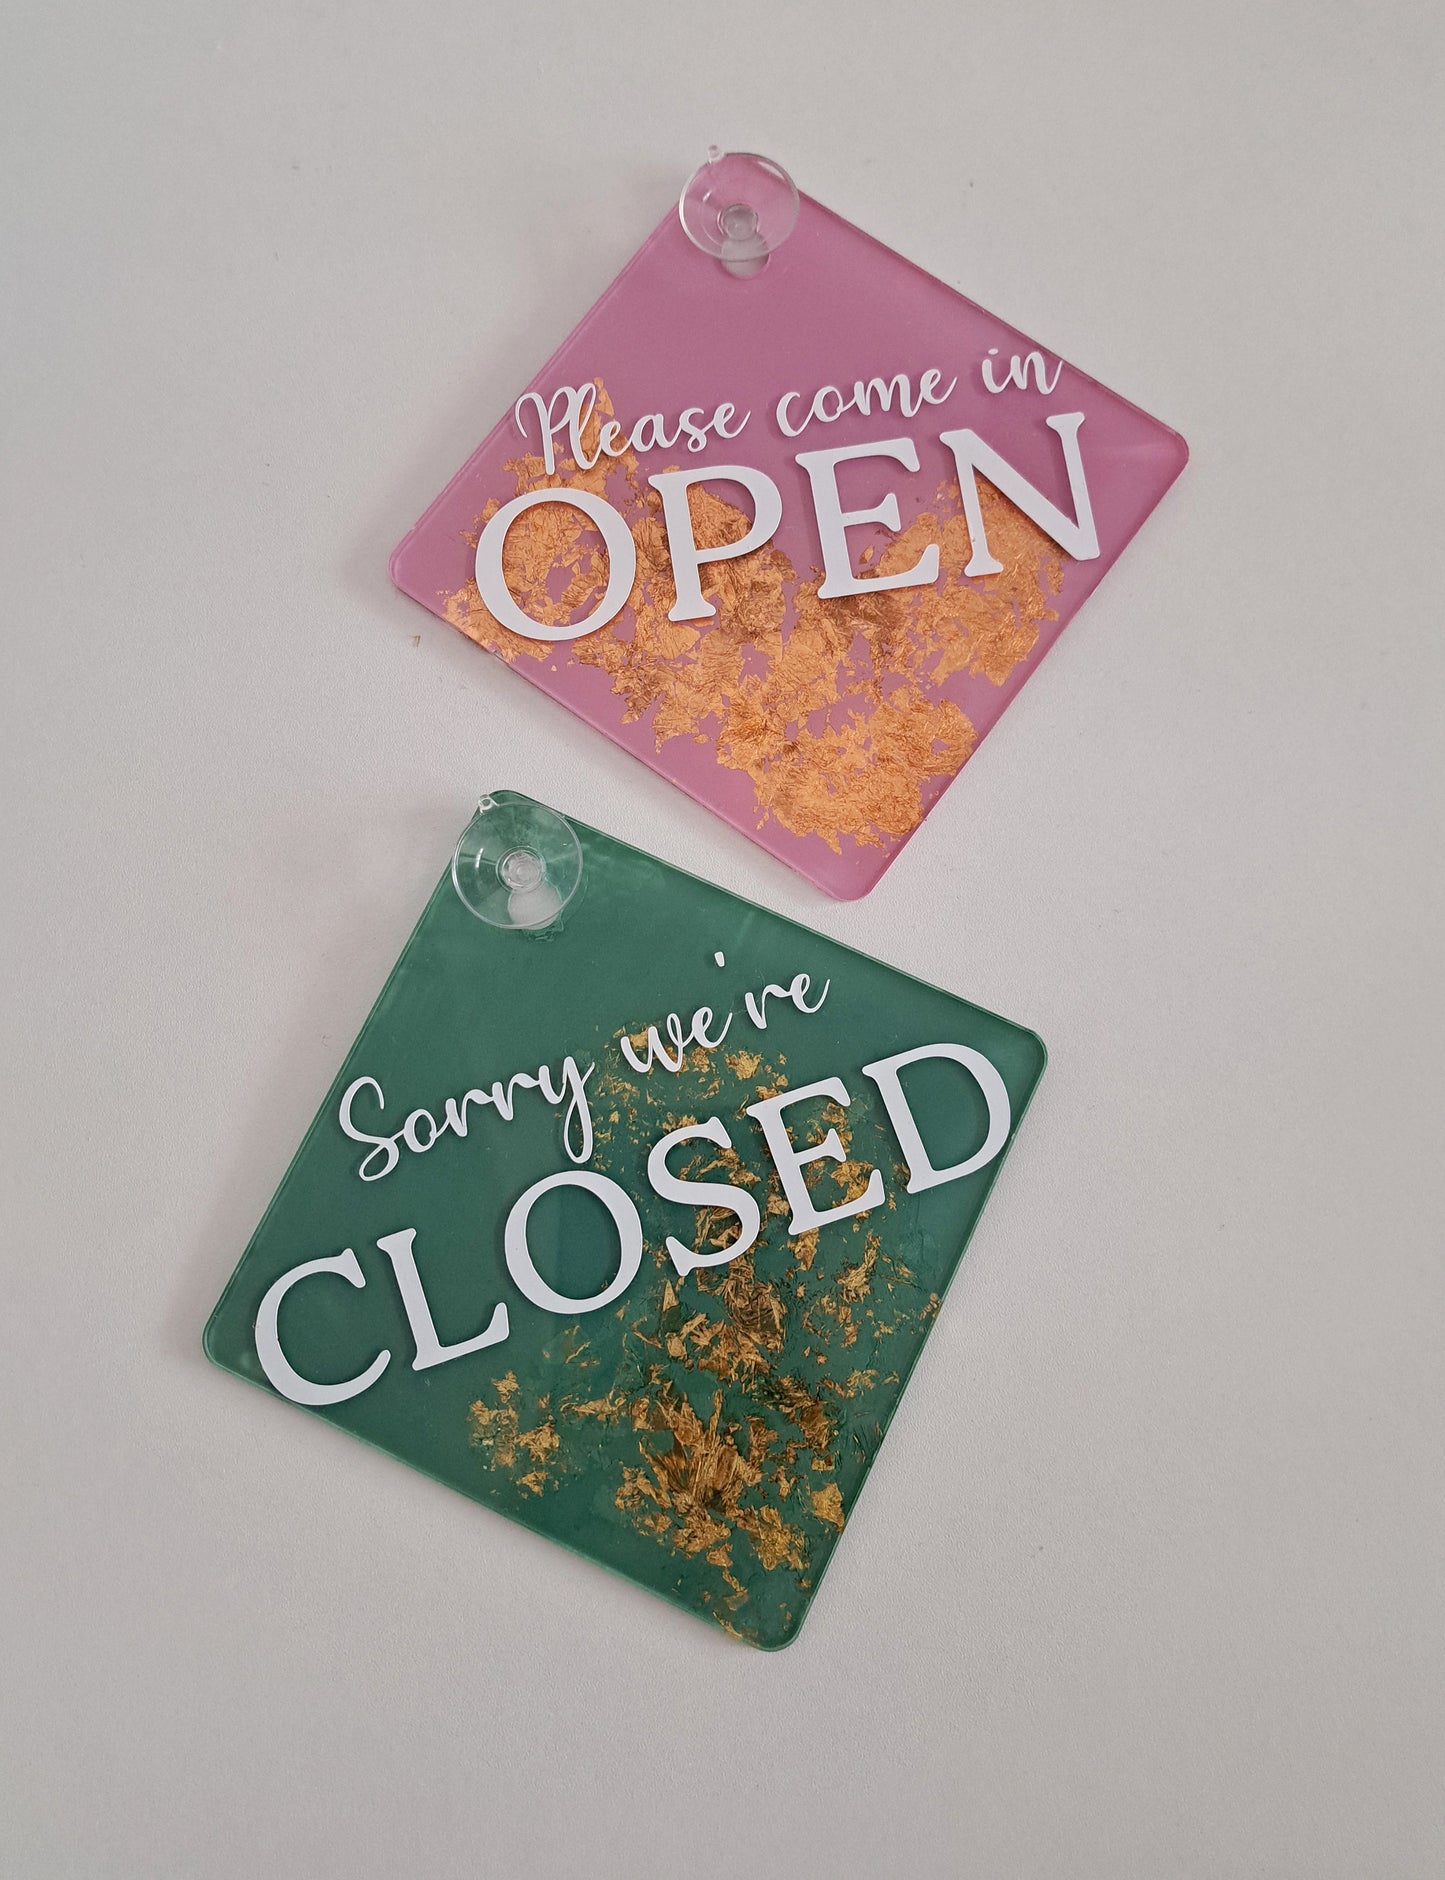 Door Signs (open and closed)